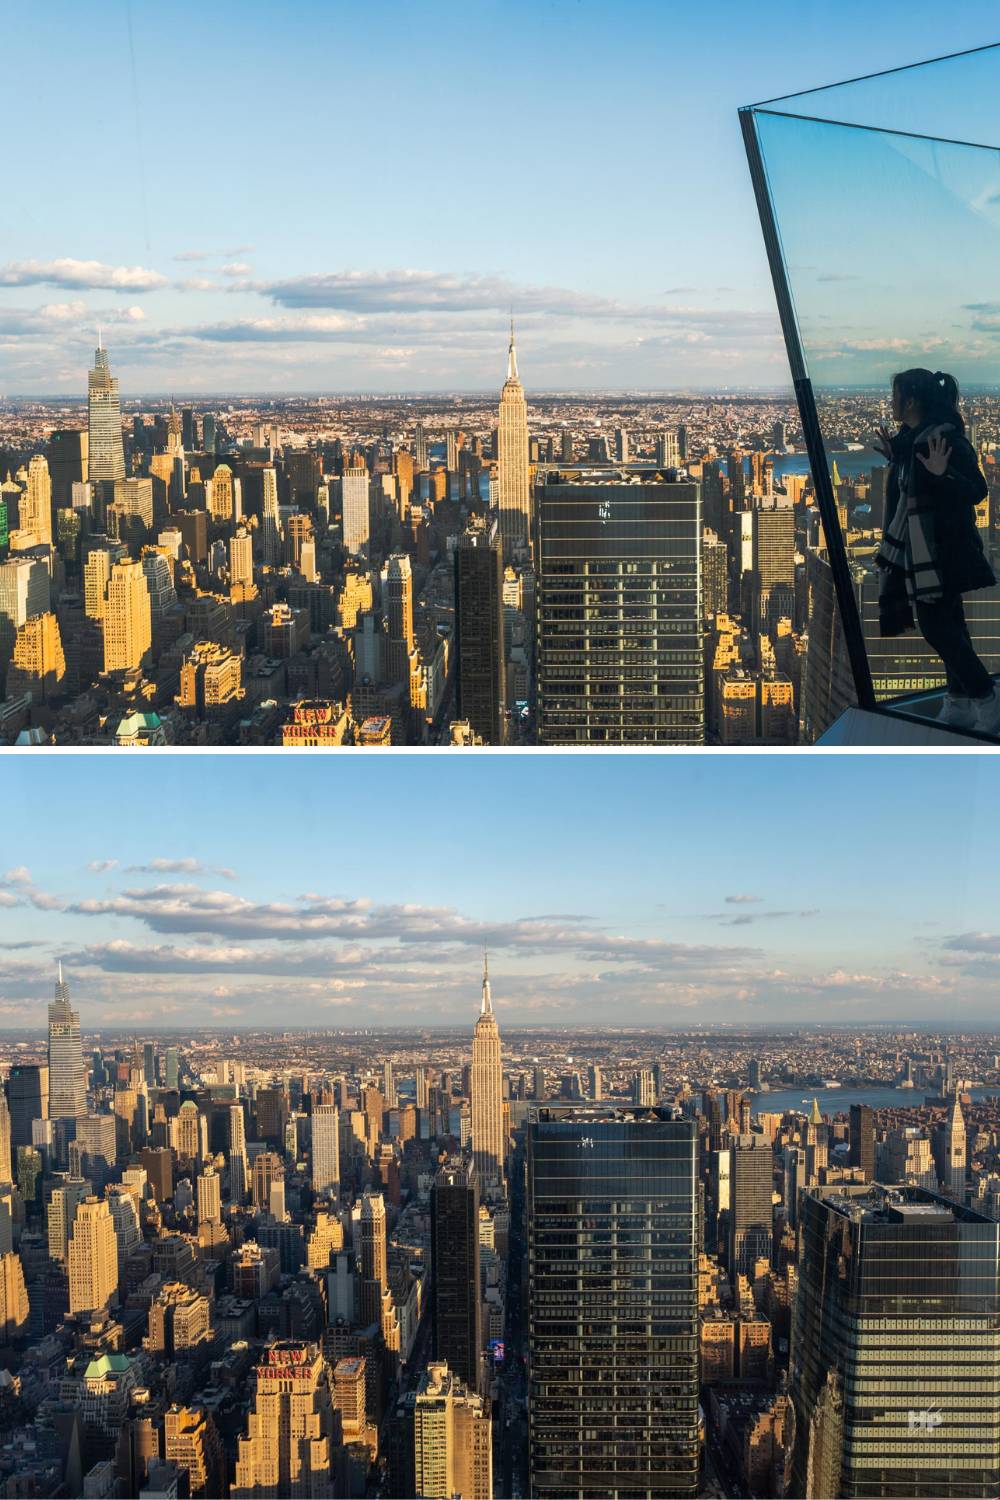 Edge Observation Deck NYC Sunset Photo spots Instagram worthy